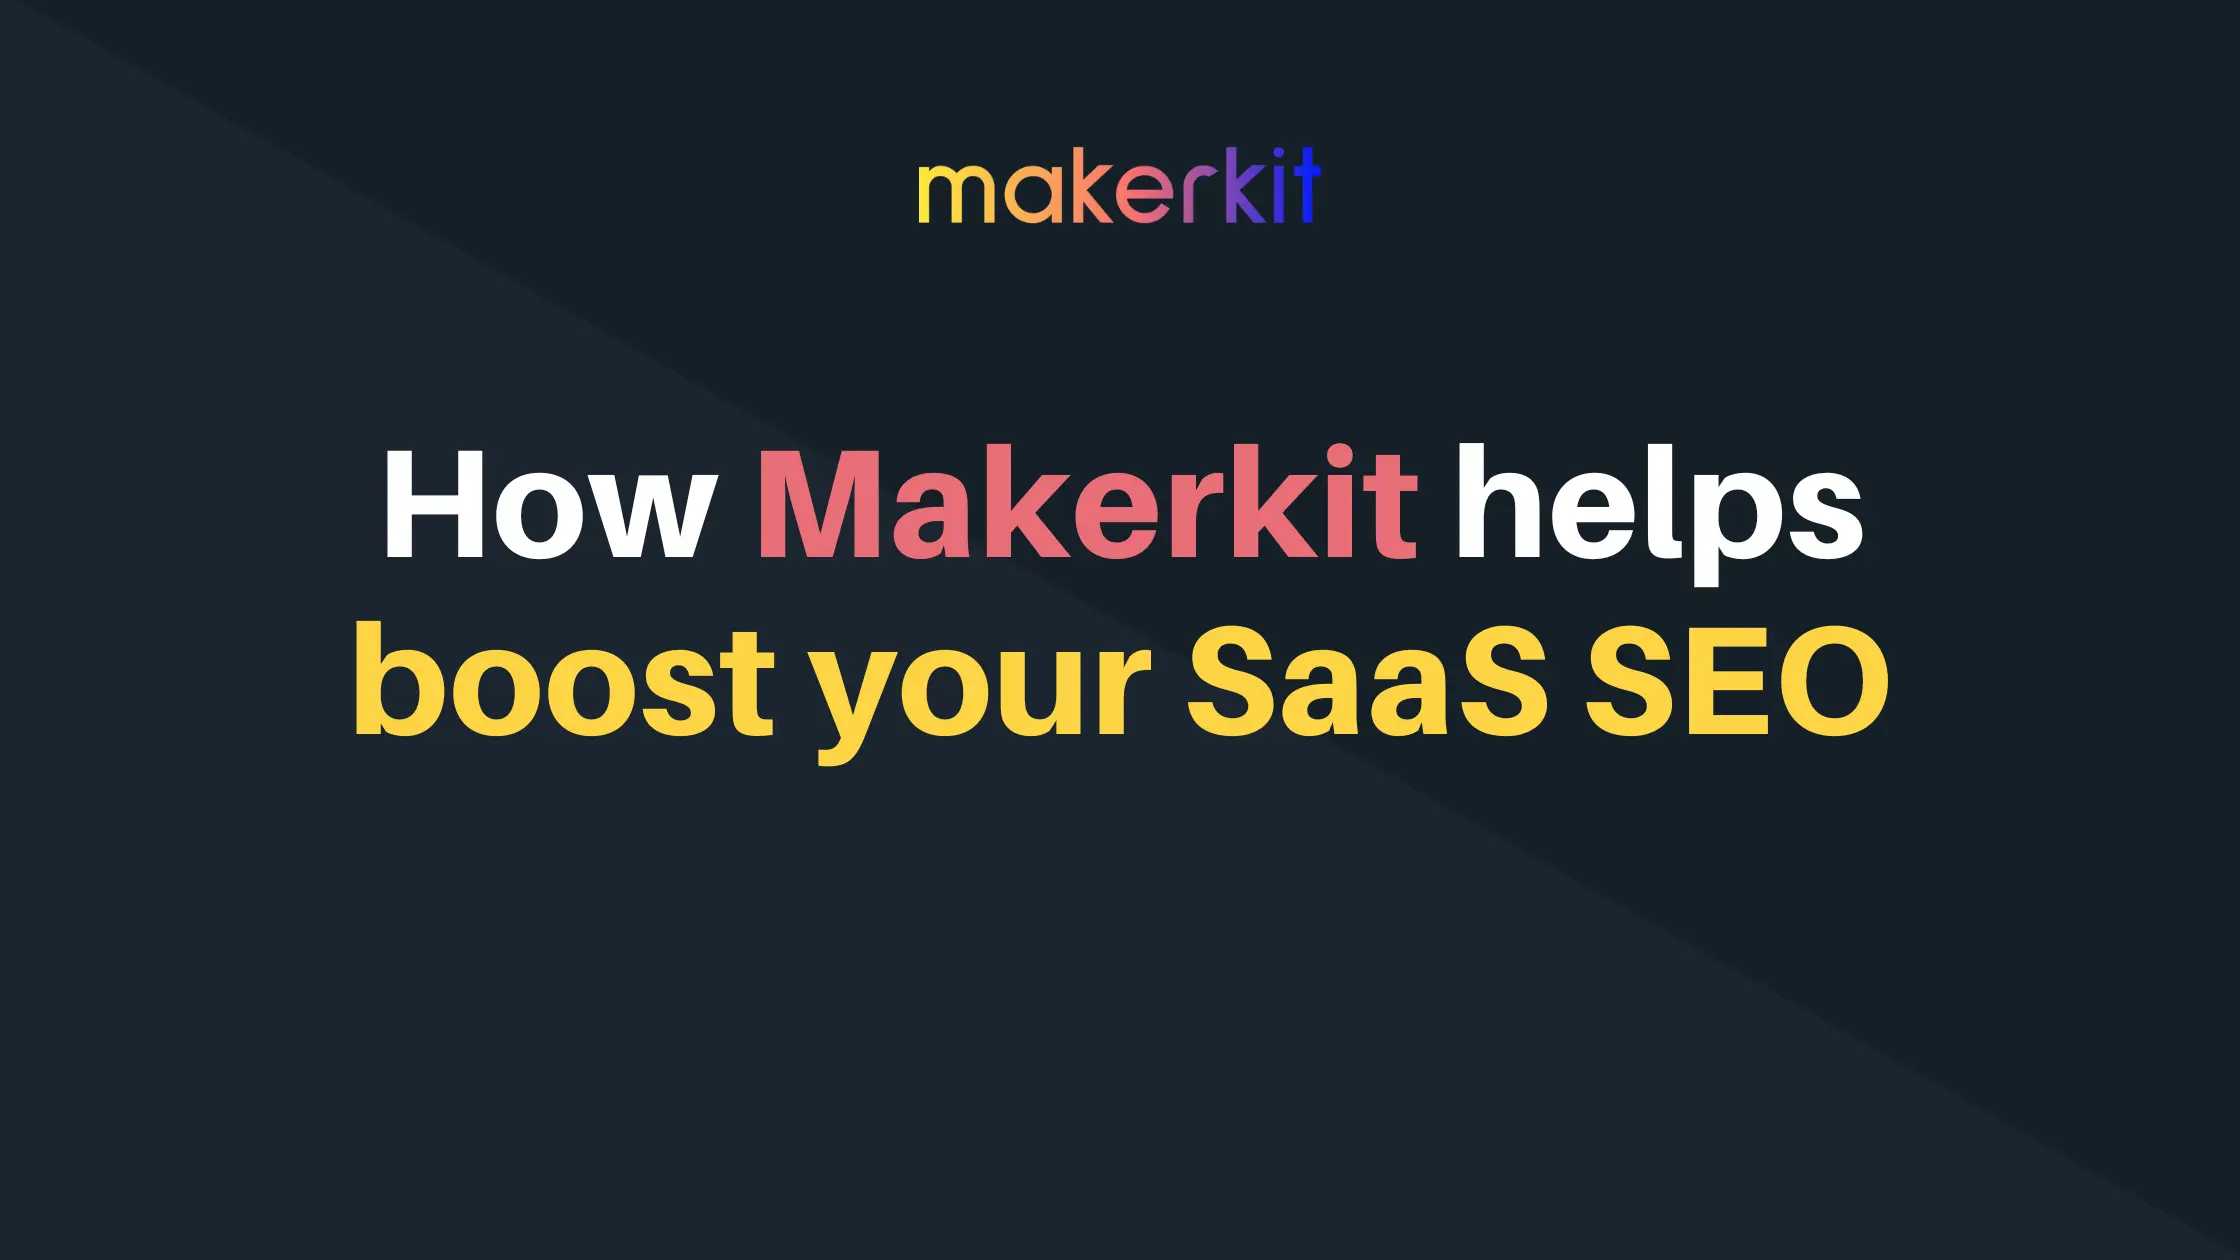 Cover Image for How Makerkit helps boost your SaaS SEO